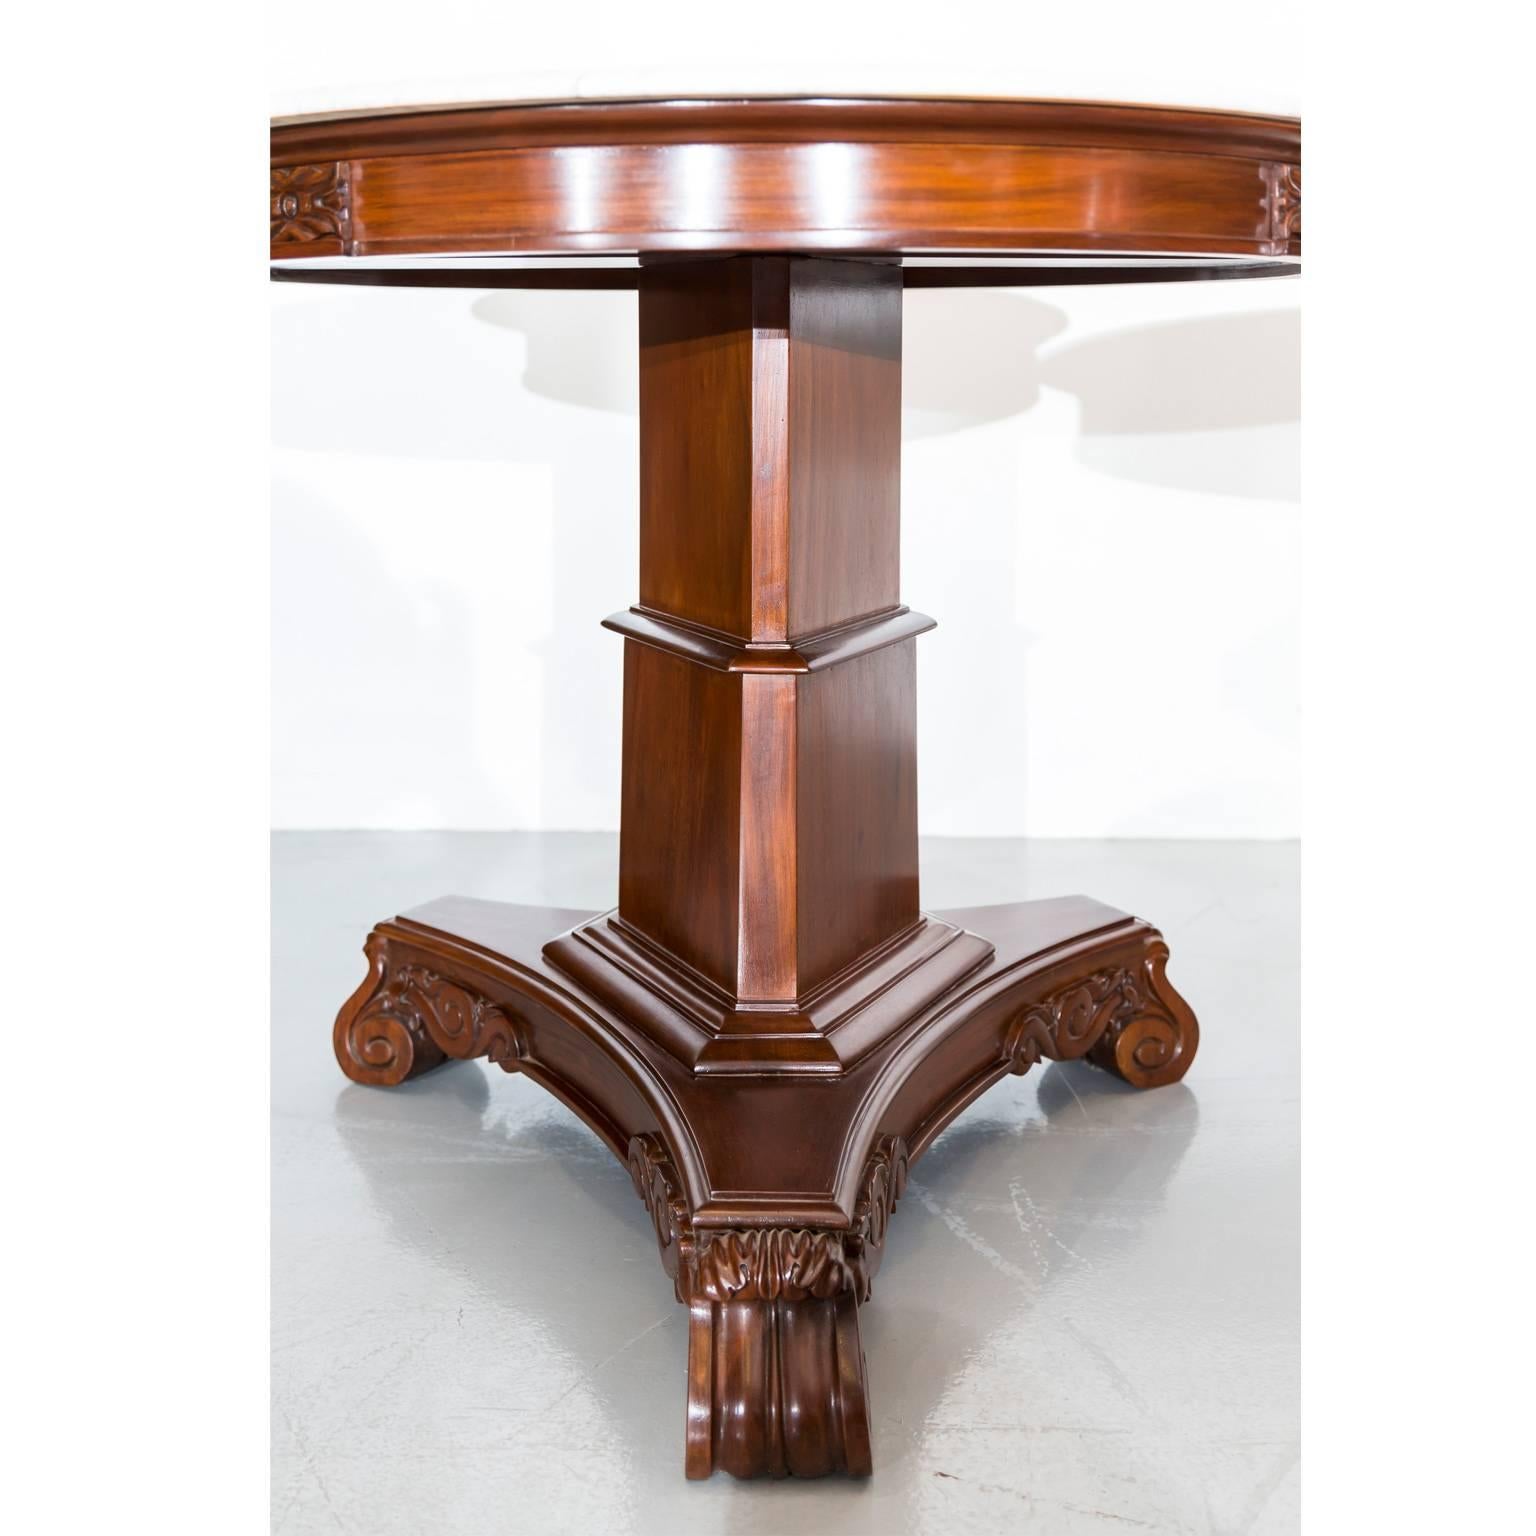 A pair of British Colonial mahogany side tables with a new beveled edge marble top. 
The top with a nicely carved apron rests on a tapered pillar surrounded with a wide molded band at the bottom. The central support rests on a carved triangle-form